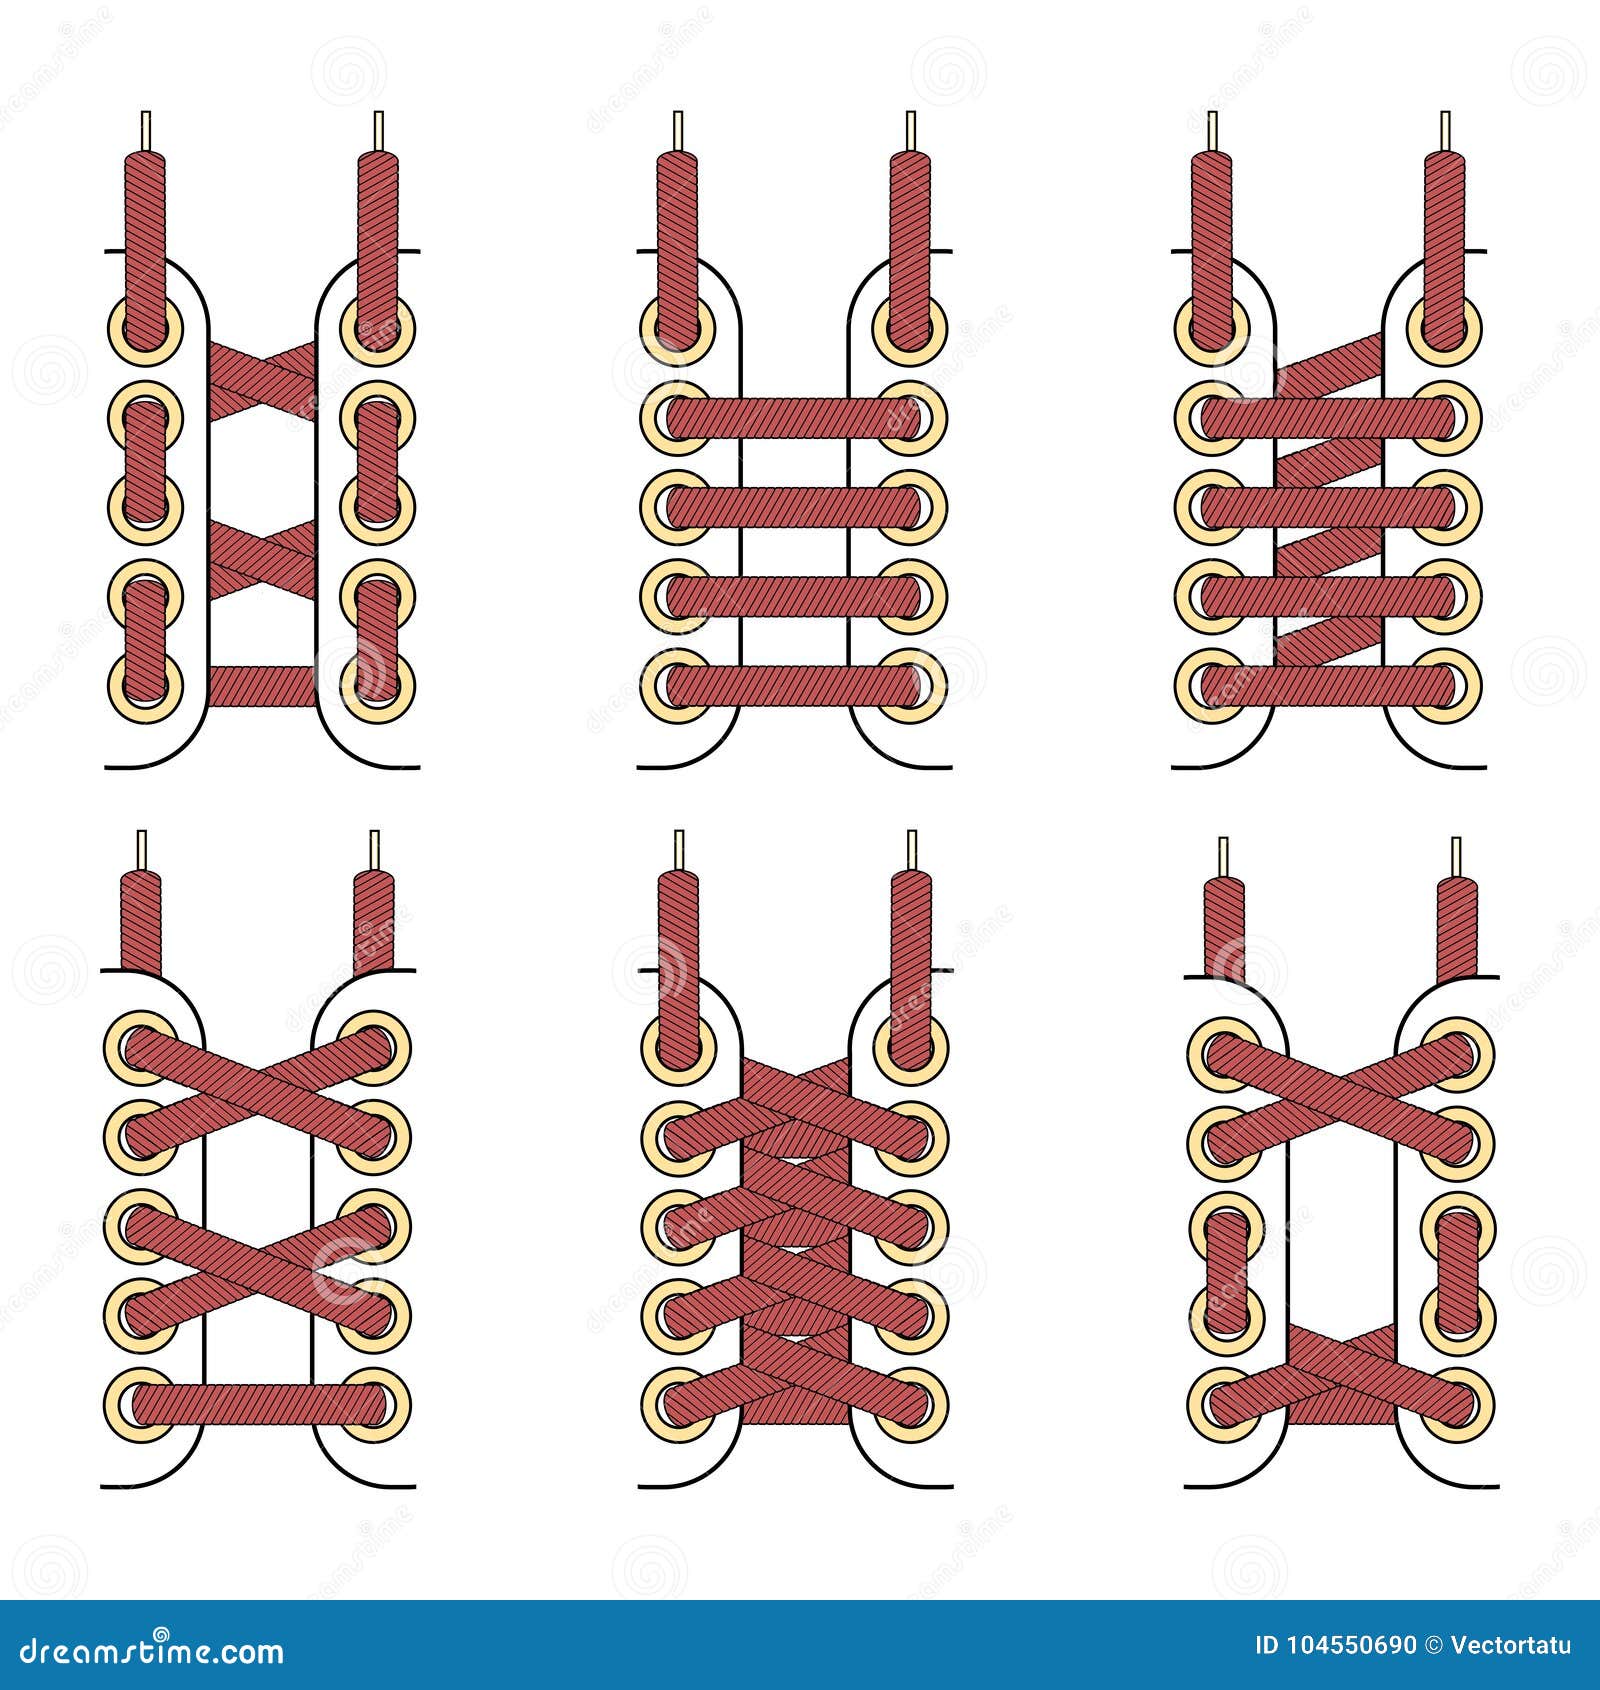 Laces tied up set stock vector. Illustration of fashion - 104550690